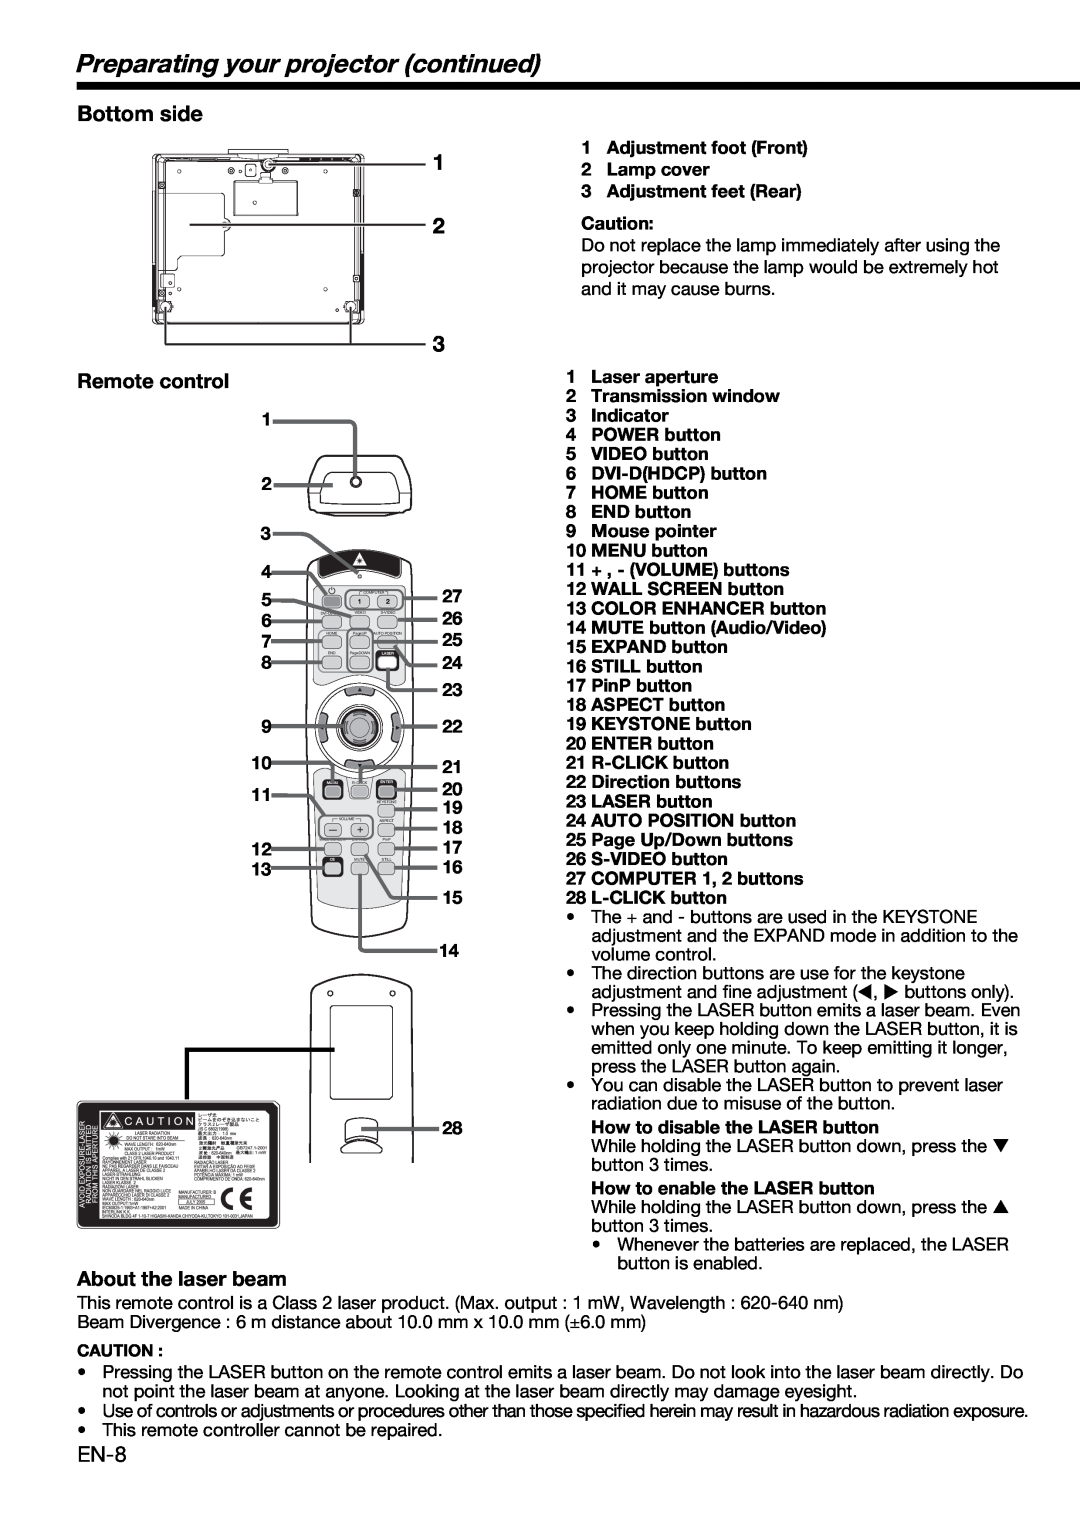 Mitsubishi Electronics XD490U user manual Preparating your projector continued, Remote control, About the laser beam 